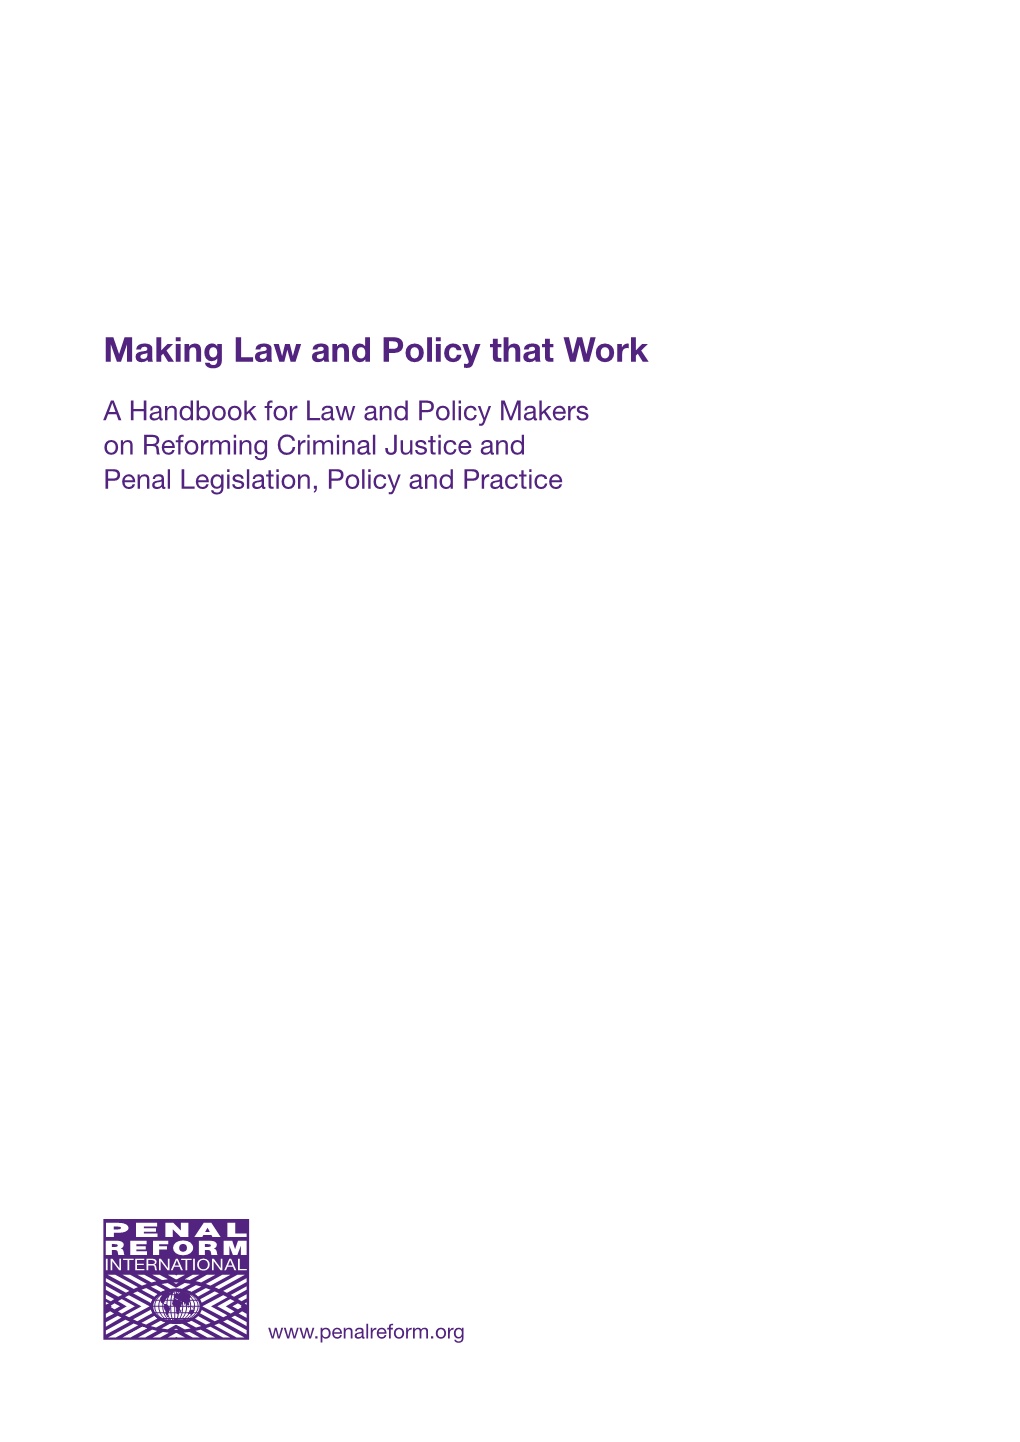 Making Law and Policy That Work